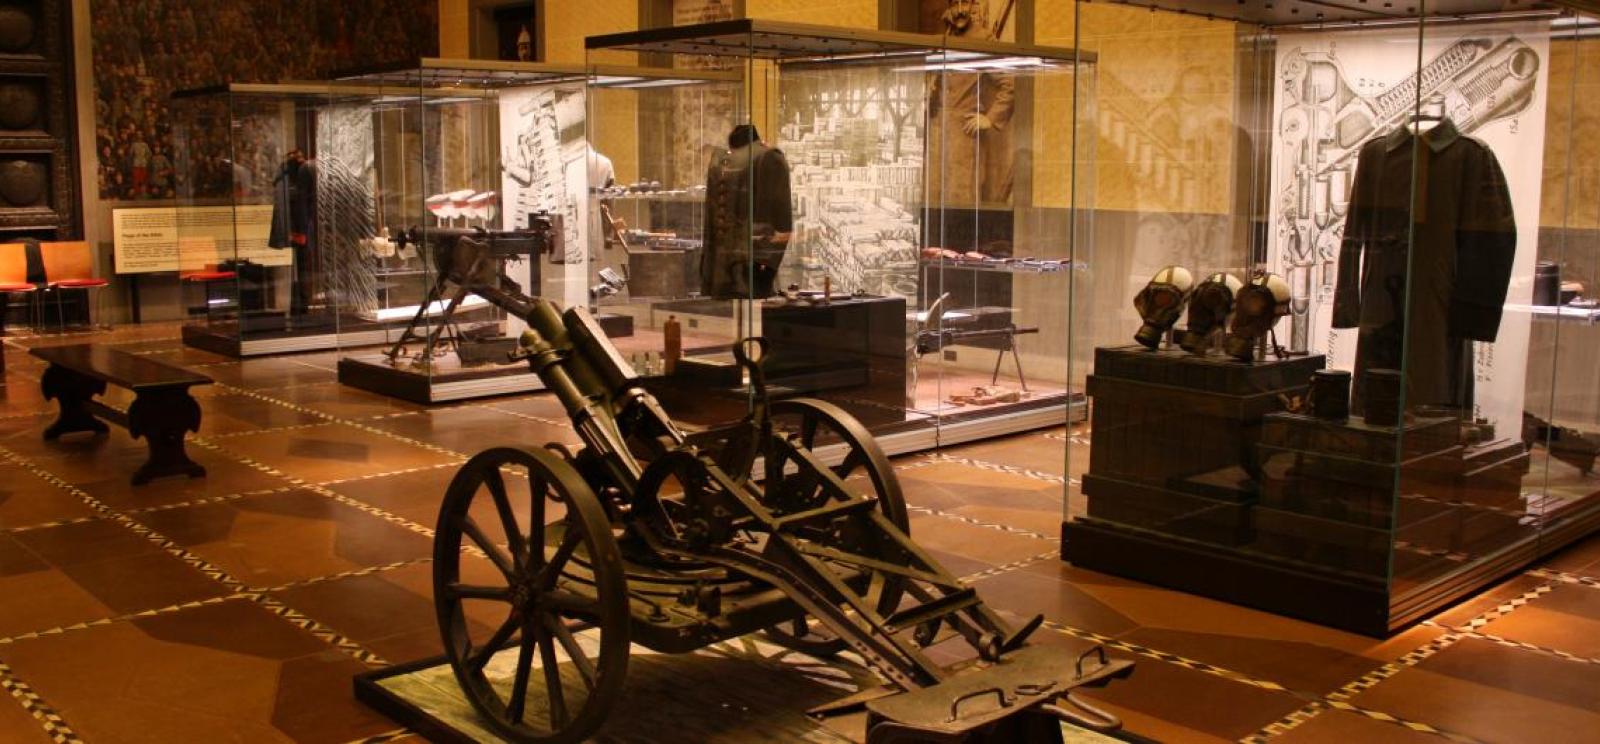 Photograph of a museum exhibition featuring displays of uniforms and artillery.